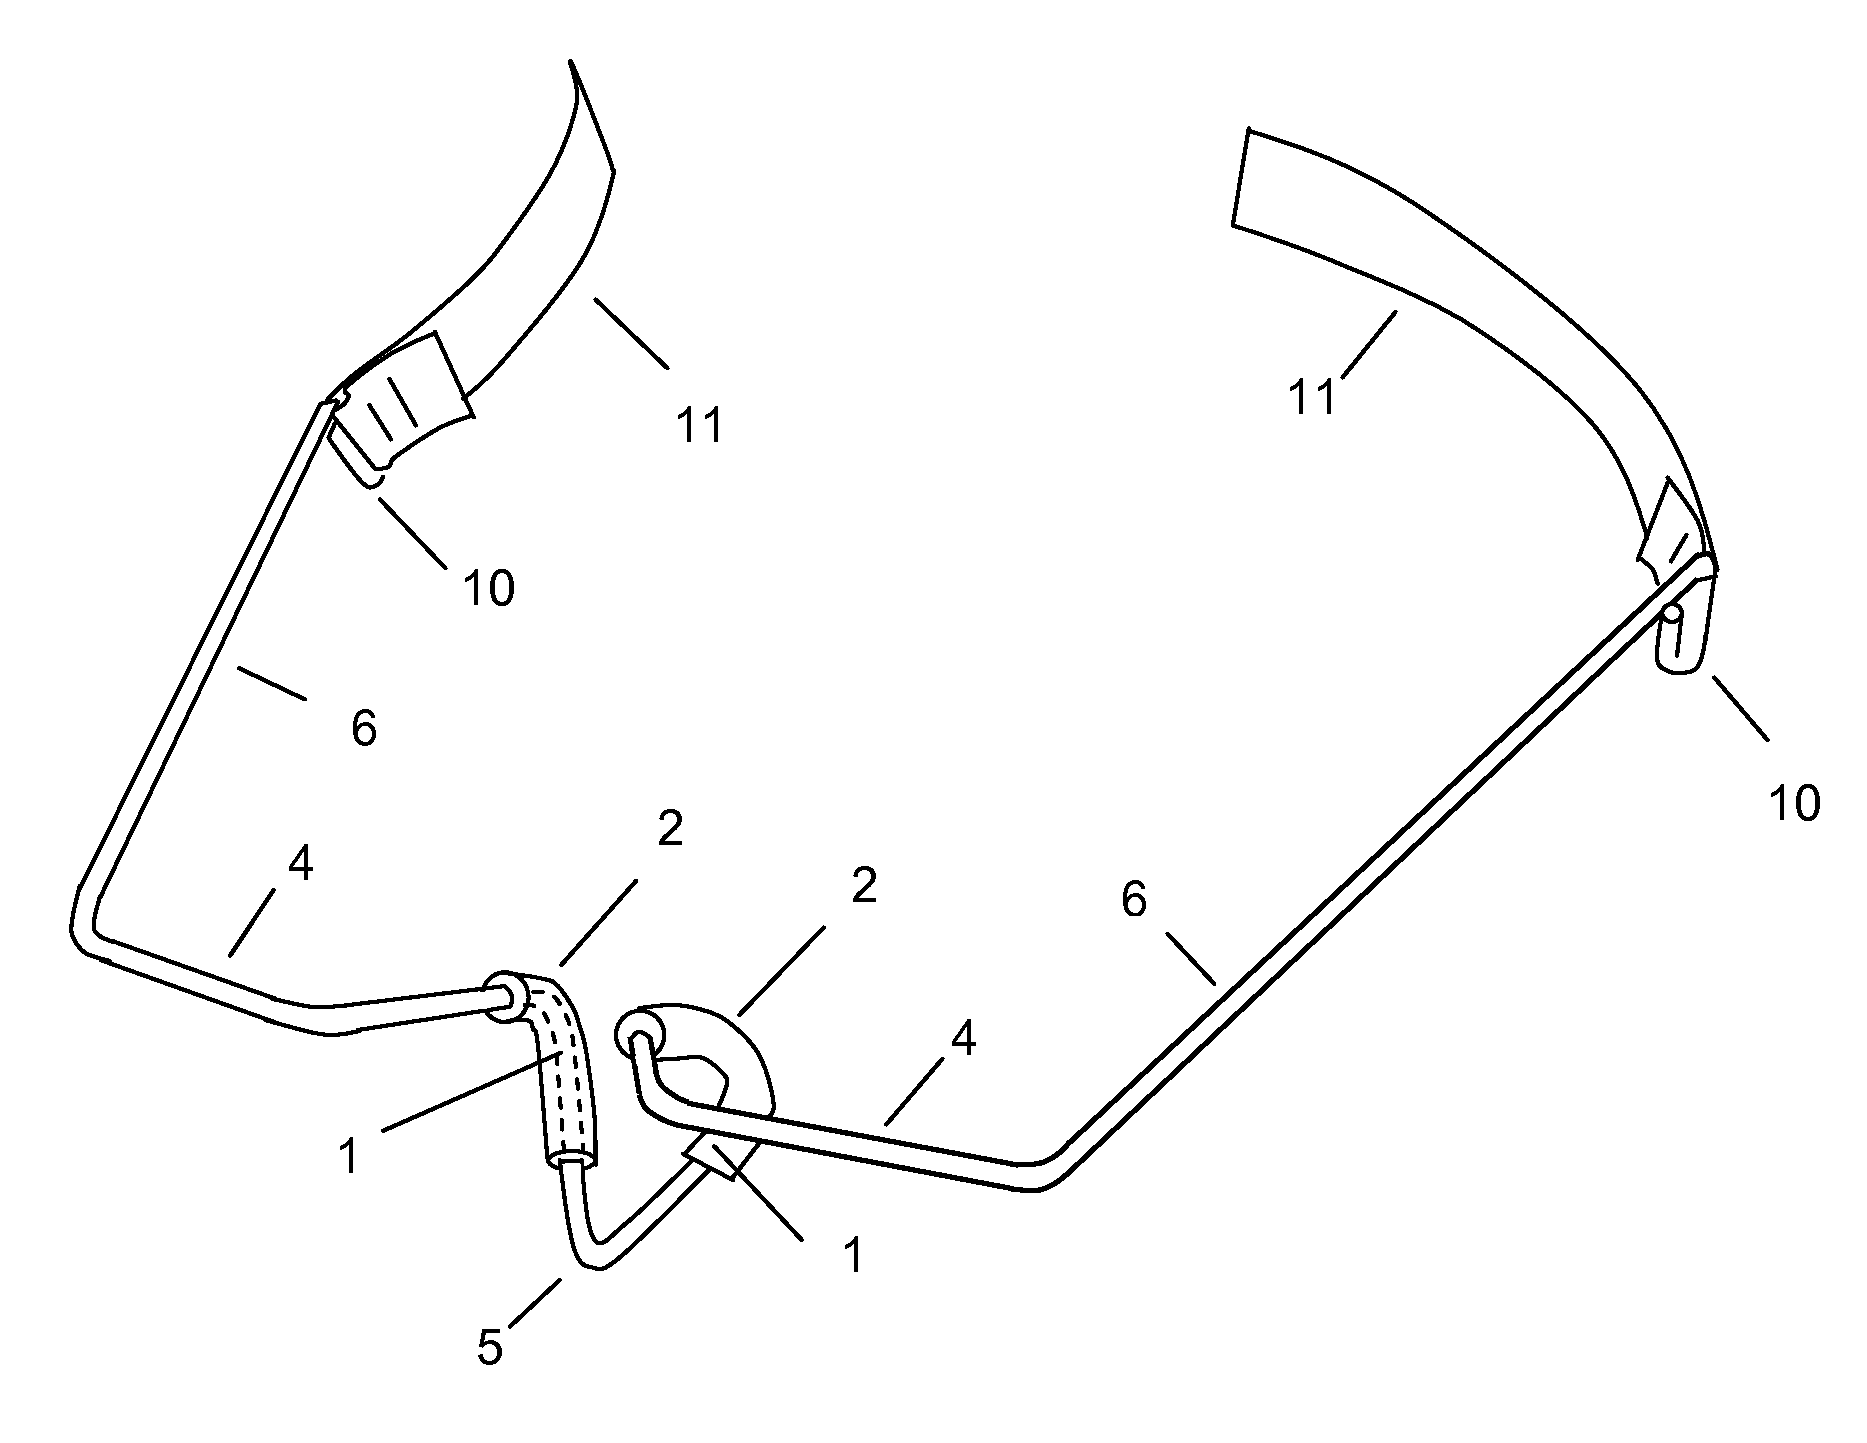 Noninvasive Lacrimal Canalicular Occlusion Device and Method